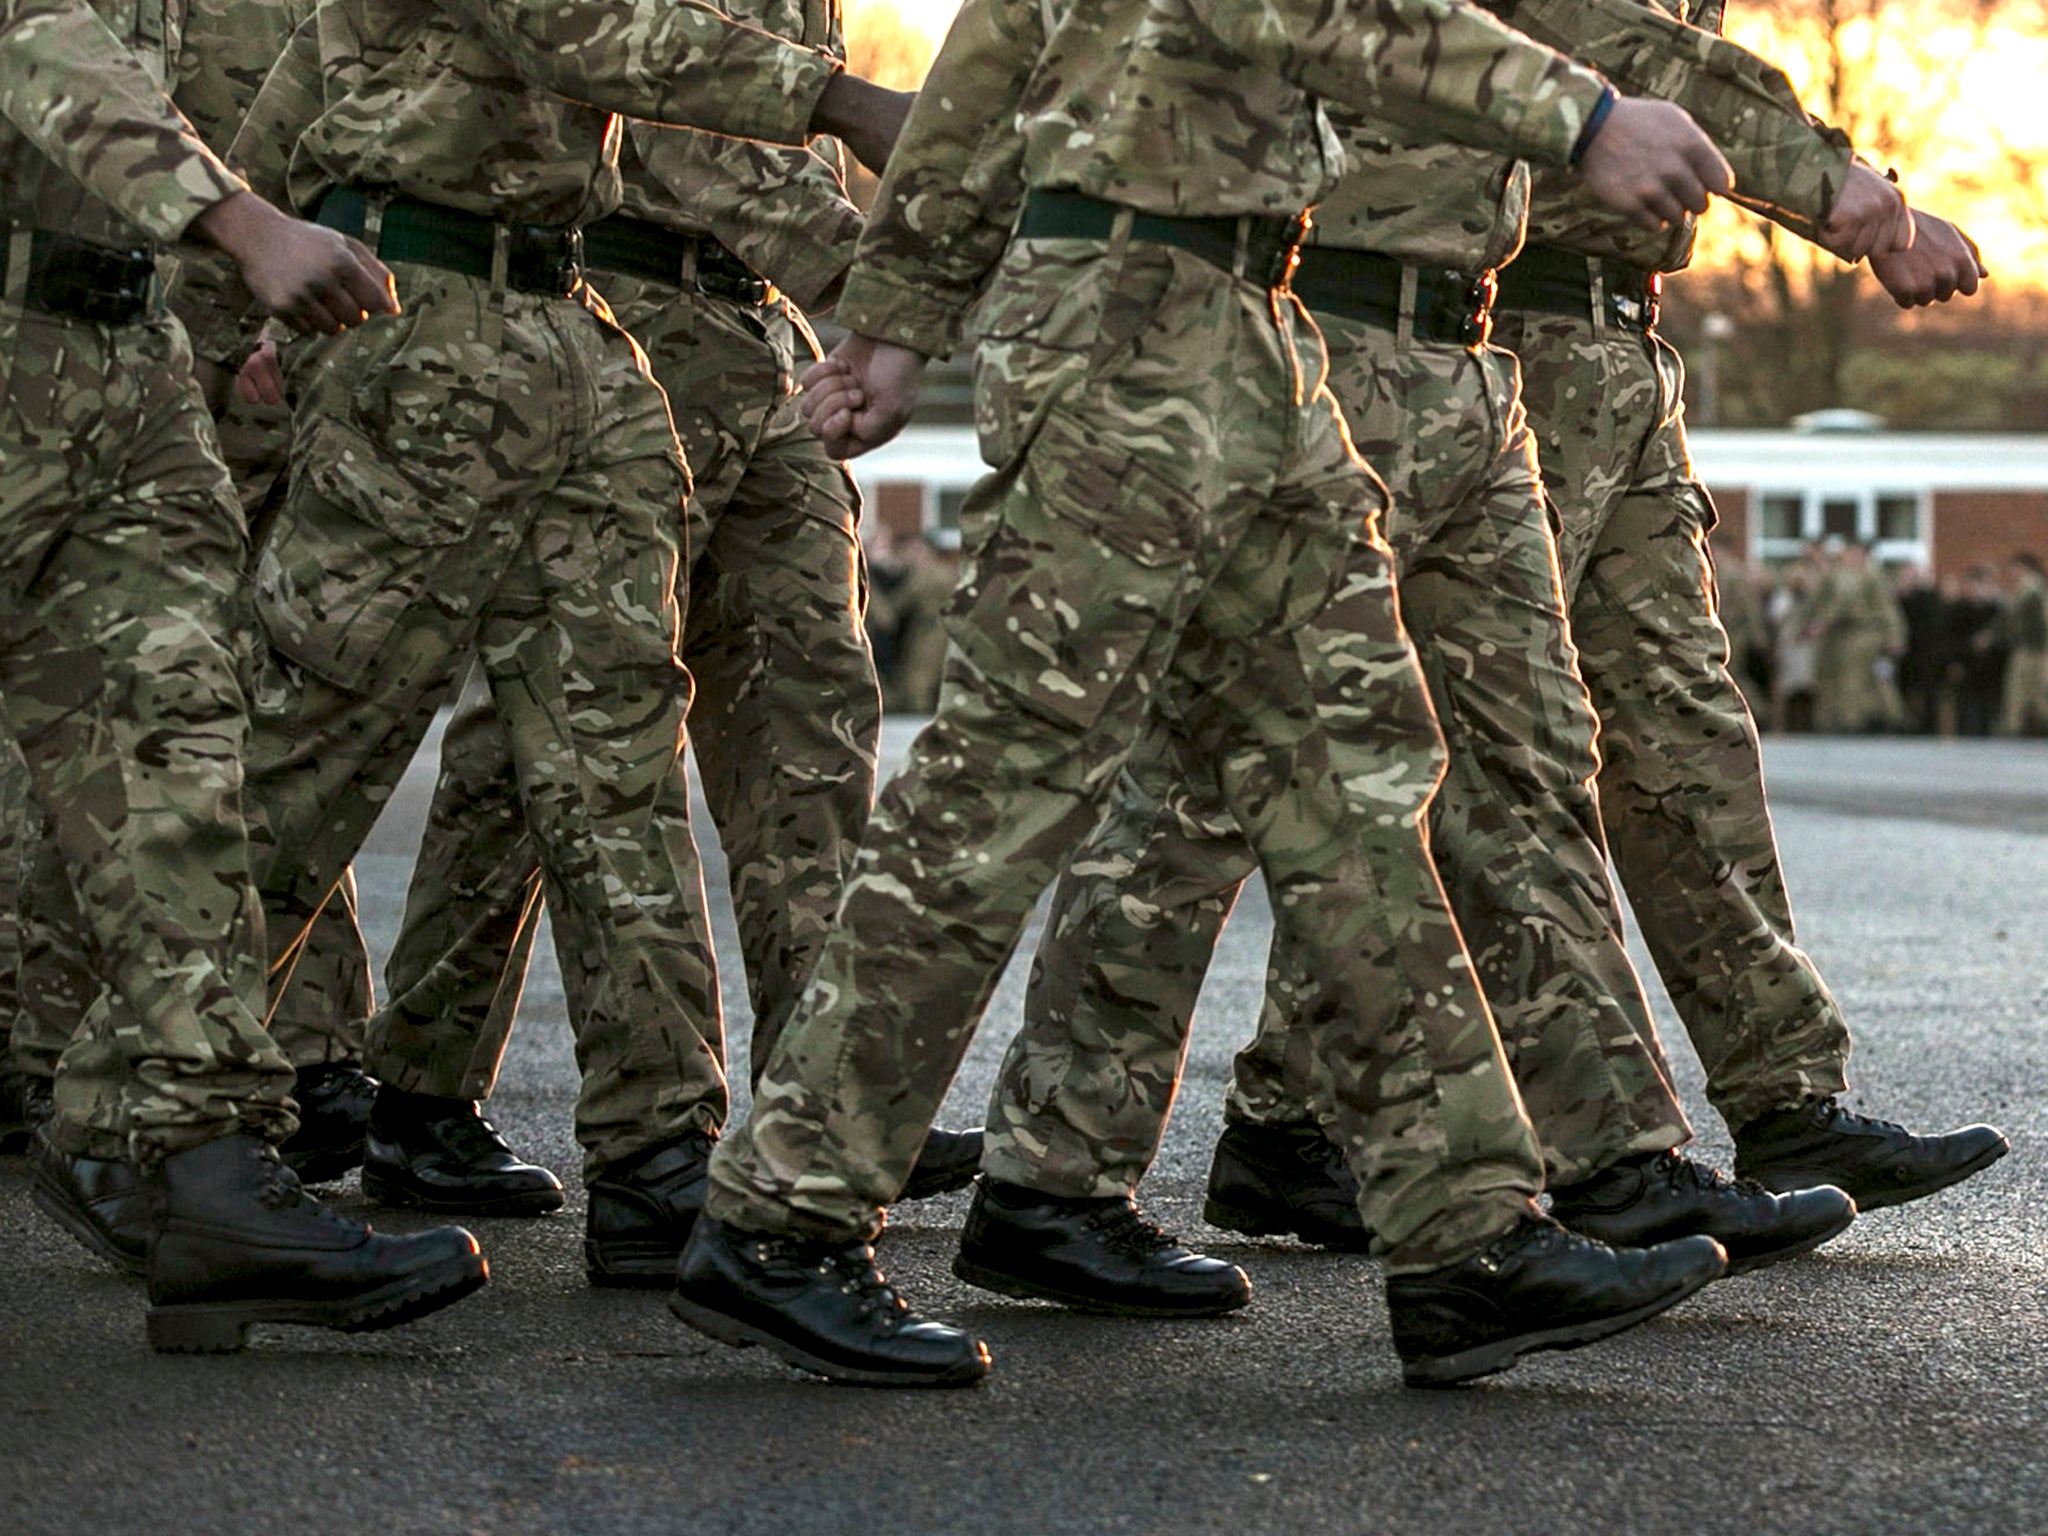 The soldiers arrested were from Larkhill Garrison in Wiltshire, an army spokesperson says